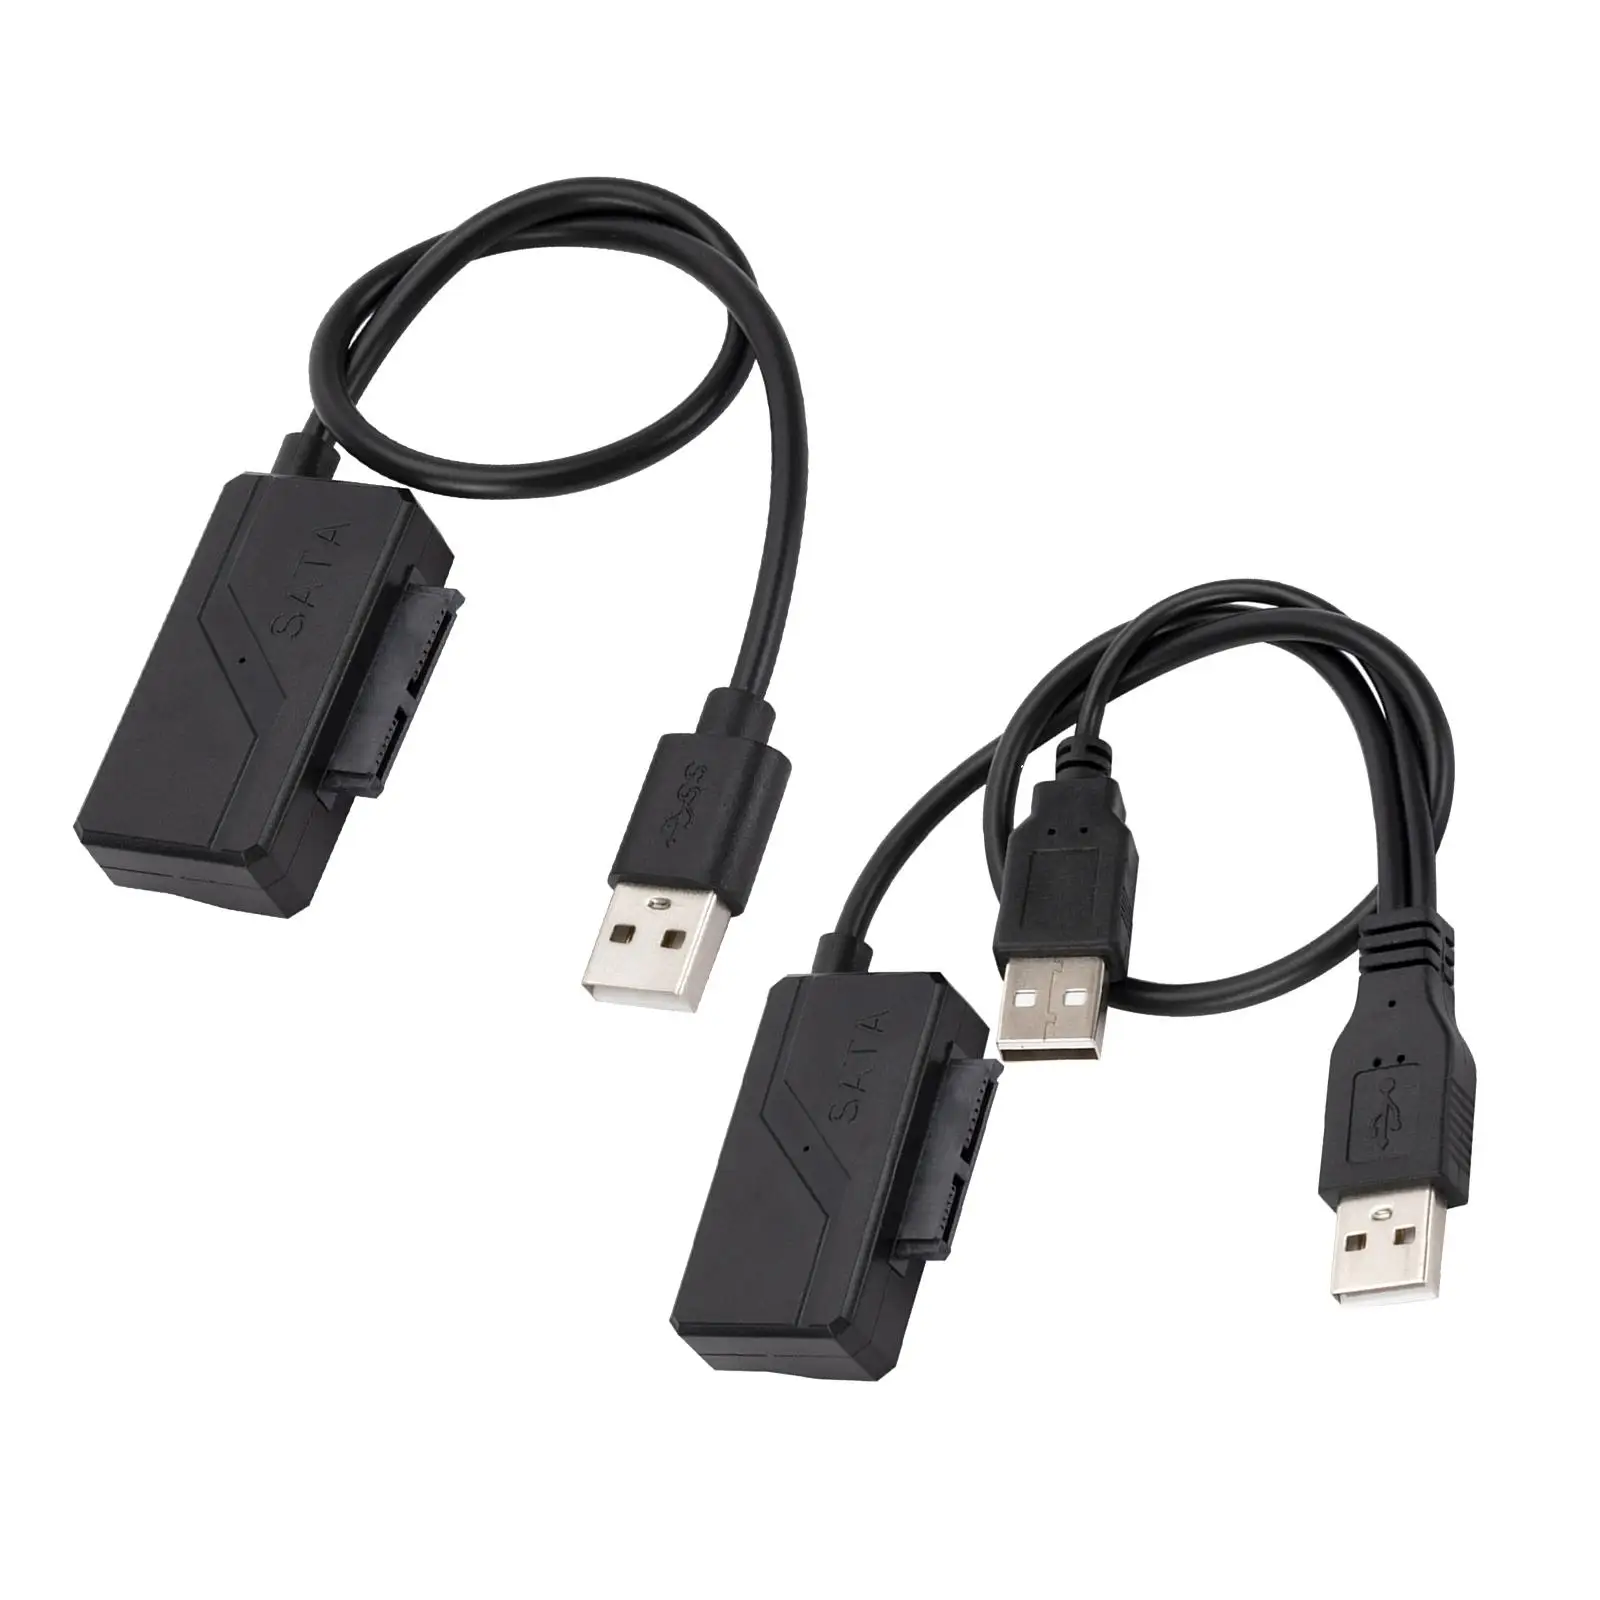 USB 2.0 to SATA 7+6 13Pin Adapter Cable Plug and Play Transfer Cord Converter for Laptop CD/DVD ROM Accessories